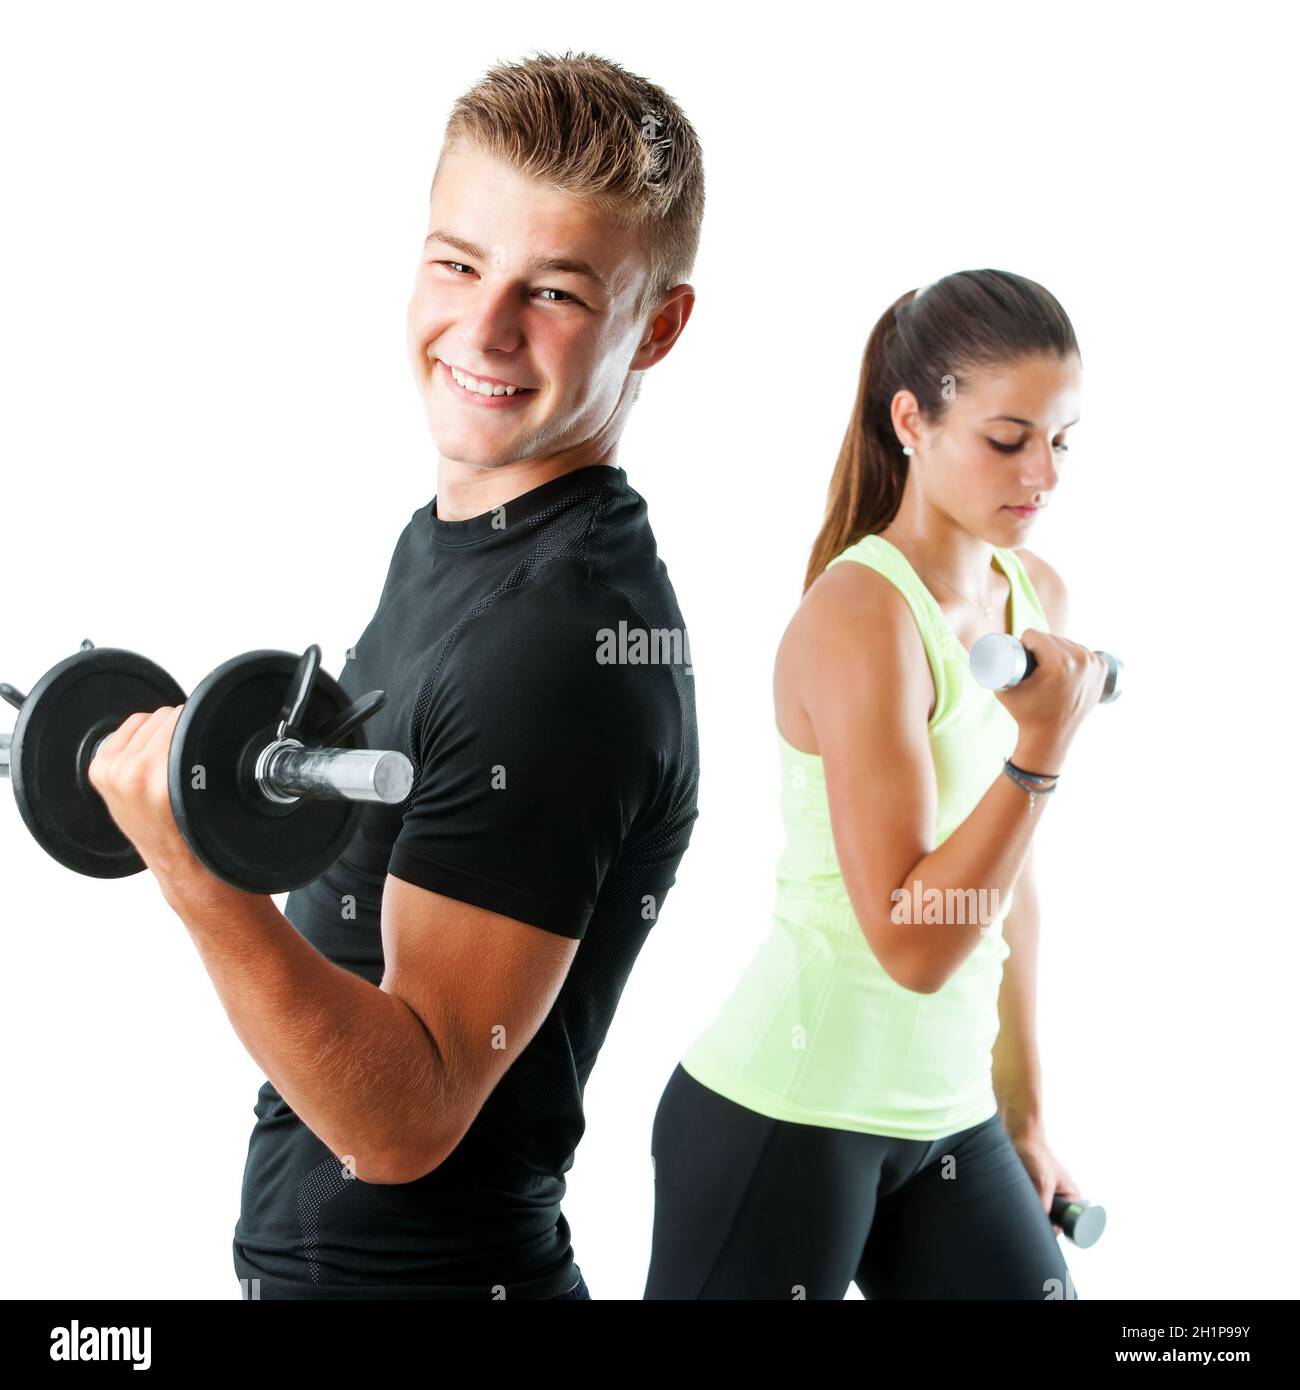 Close up portrait of handsome teen boy working out with weights.Out of focus girl working out in background.Isolated on white. Stock Photo